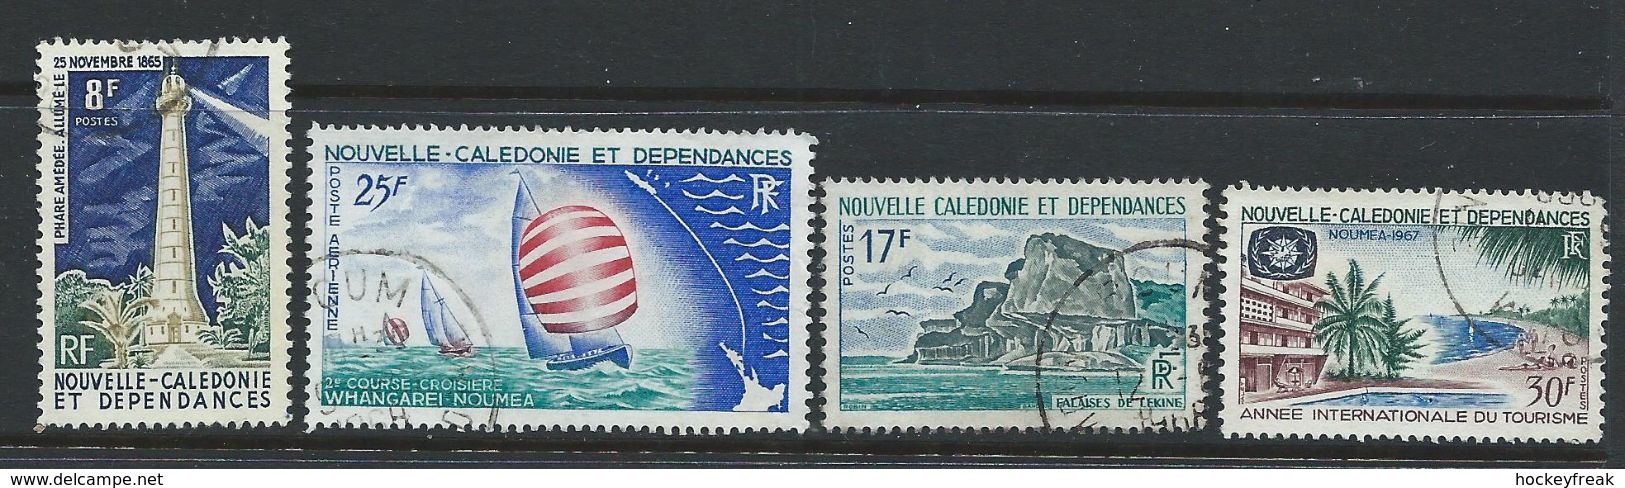 New Caledonia 1965-67 - 4 X VGU-FU Issues SG397, 424-425 & 428 Cat £11.75 SG2015 - See Full Description Below - Used Stamps